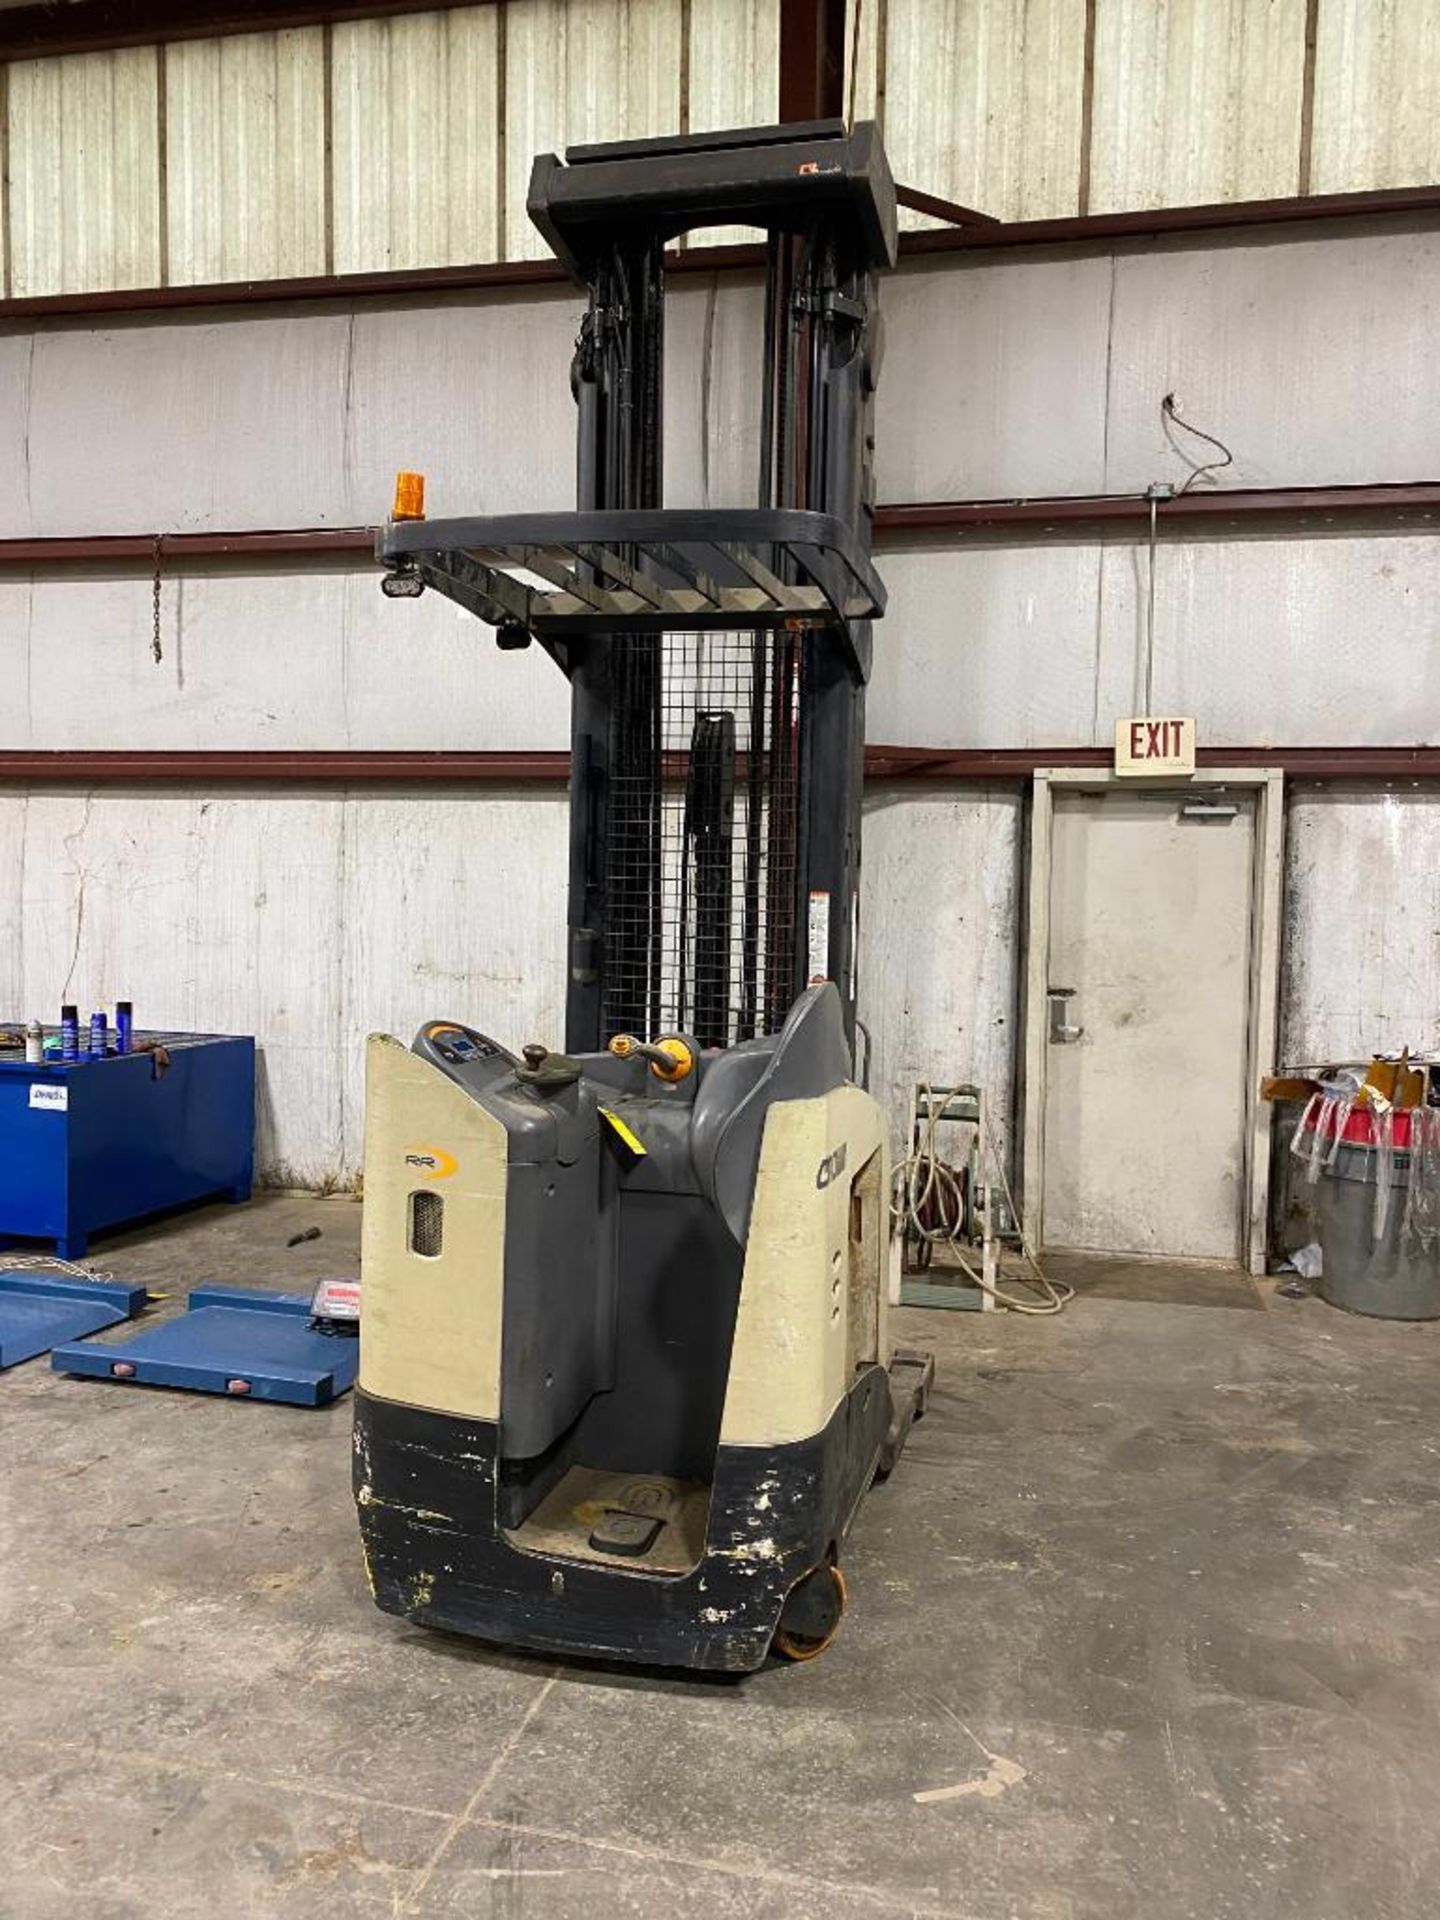 393C Crown 4,500 Lb. Capacity Reach Truck, Model Rr 5725-45, S/N 1a356735, 321” Max. Lift Height, 14 - Image 2 of 6